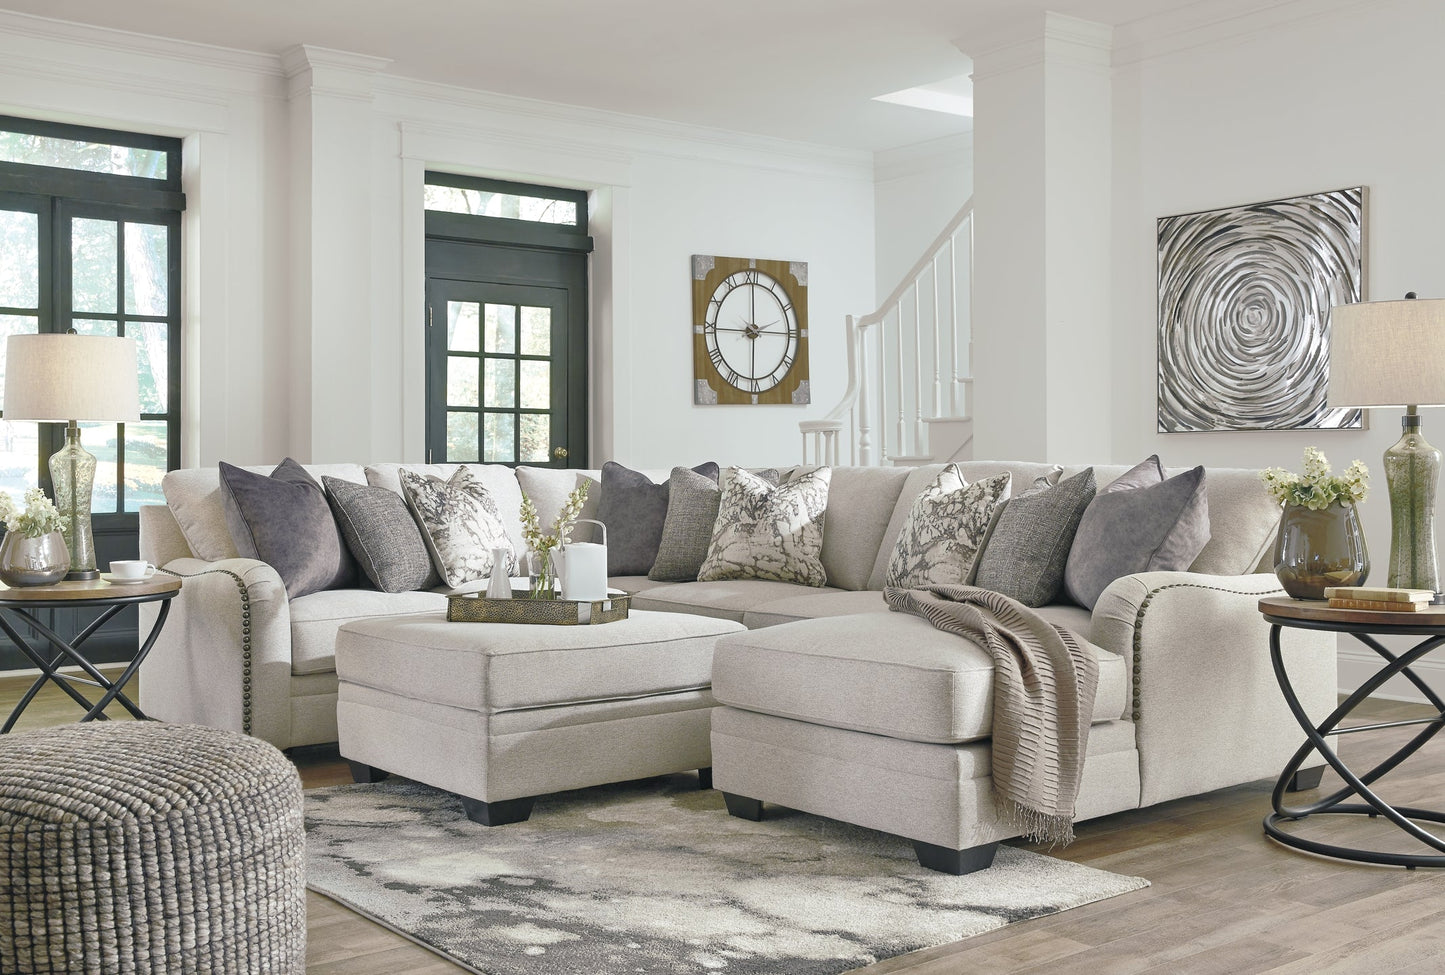 Dellara 4-Piece Sectional with Chaise Smyrna Furniture Outlet